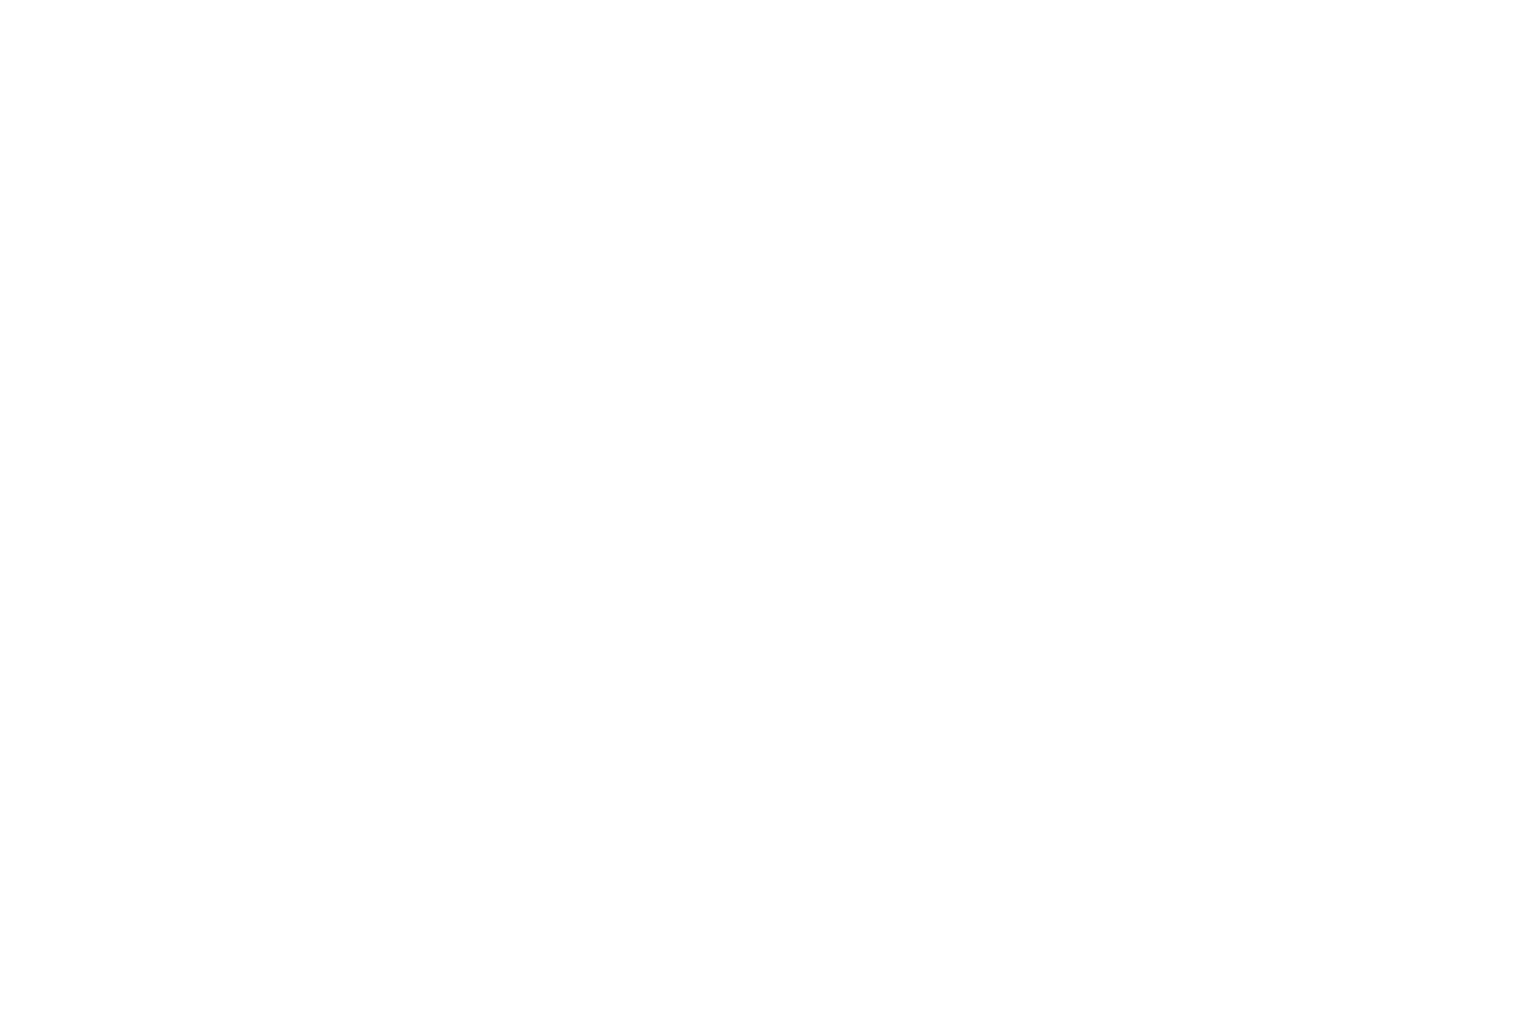 a white, hand written cursive word that says 'hello'. This was created by Rojhan Paydar, the developer.